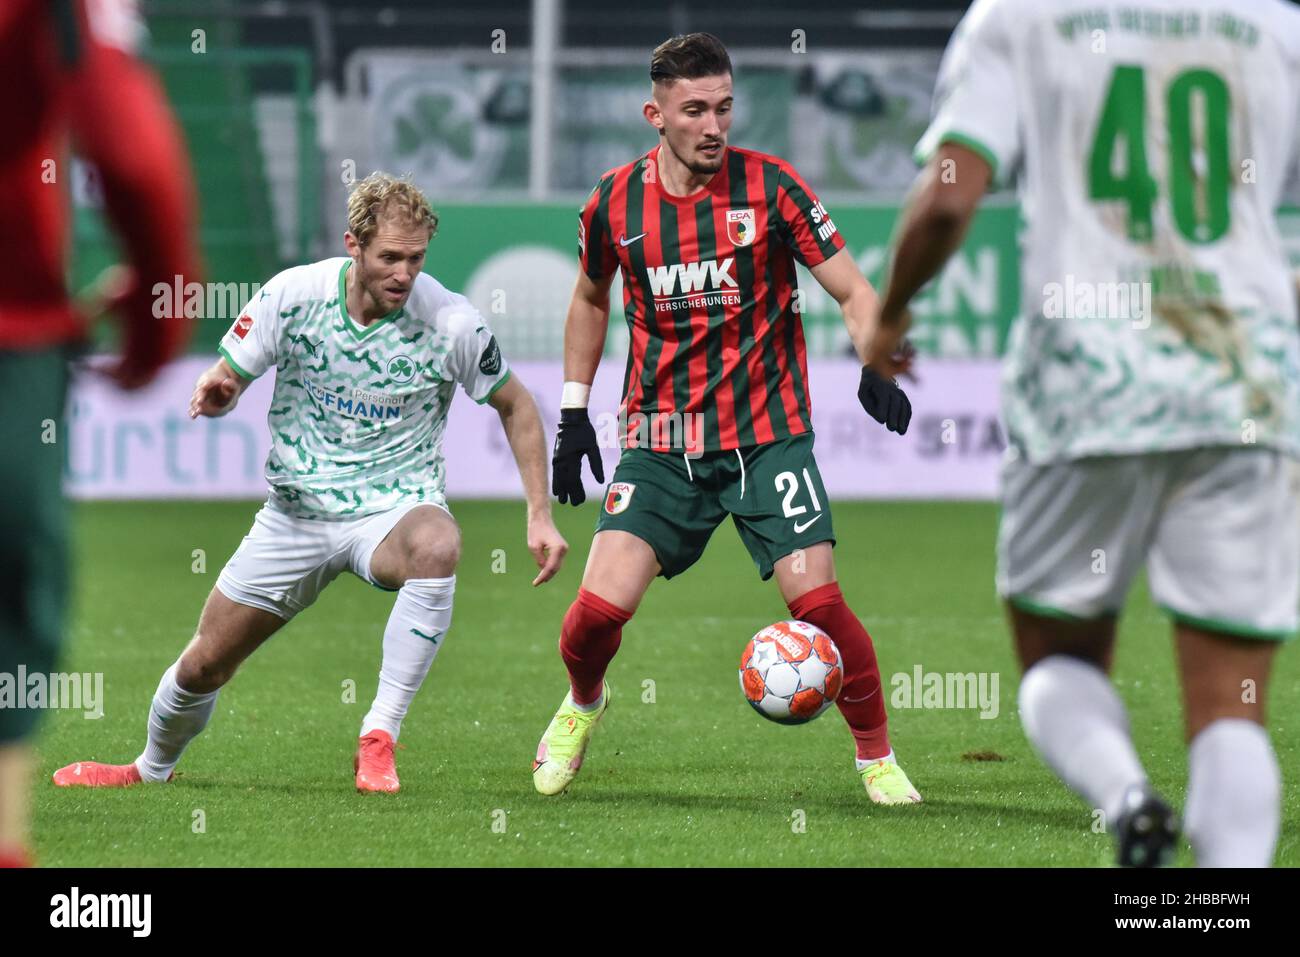 Fuerth, Germany. 18th Dec, 2021.  Fussball, 1.Bundesliga - SpVgg Greuther Fuerth vs. FC Augsburg  Image: (fLTR) Sebastian Griesbeck (SpVgg Greuther Fürth,22), Andi Zeqiri (FC Augsburg, 21)  DFL regulations prohibit any use of photographs as image sequences and or quasi-video Credit: Ryan Evans/Alamy Live News Stock Photo